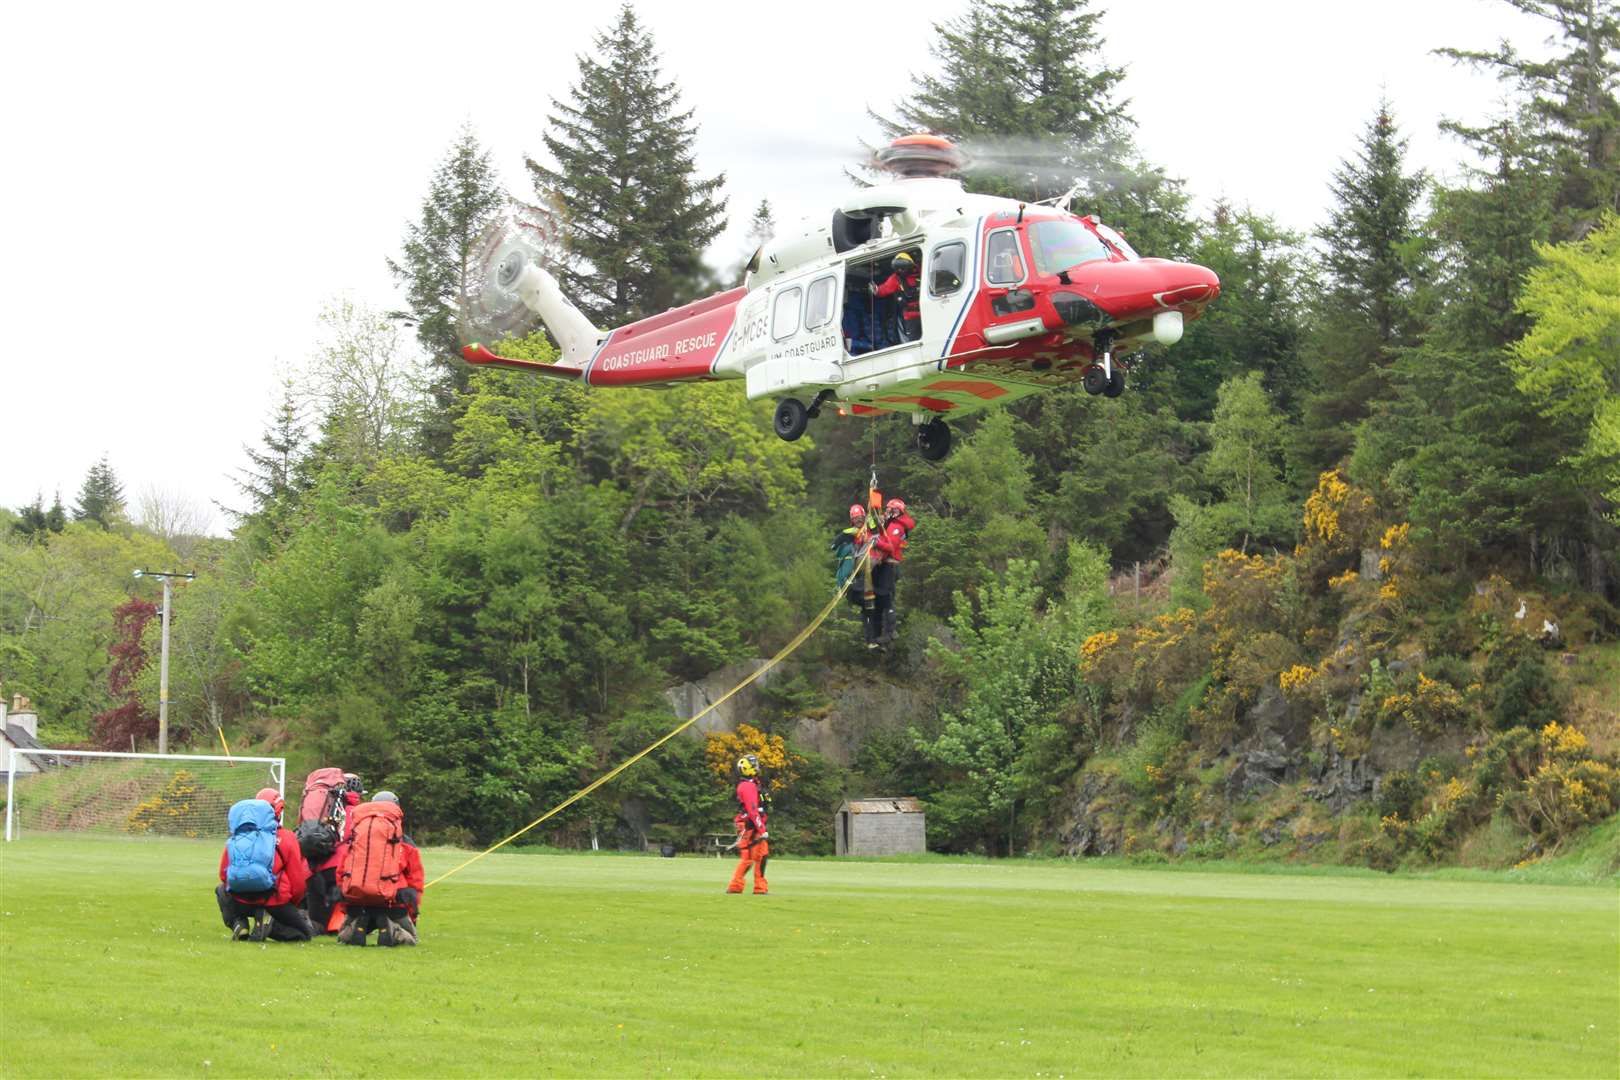 Members of the Assynt Mountain Rescue Team training with the HM Coastguard helicopter at Lochinver.